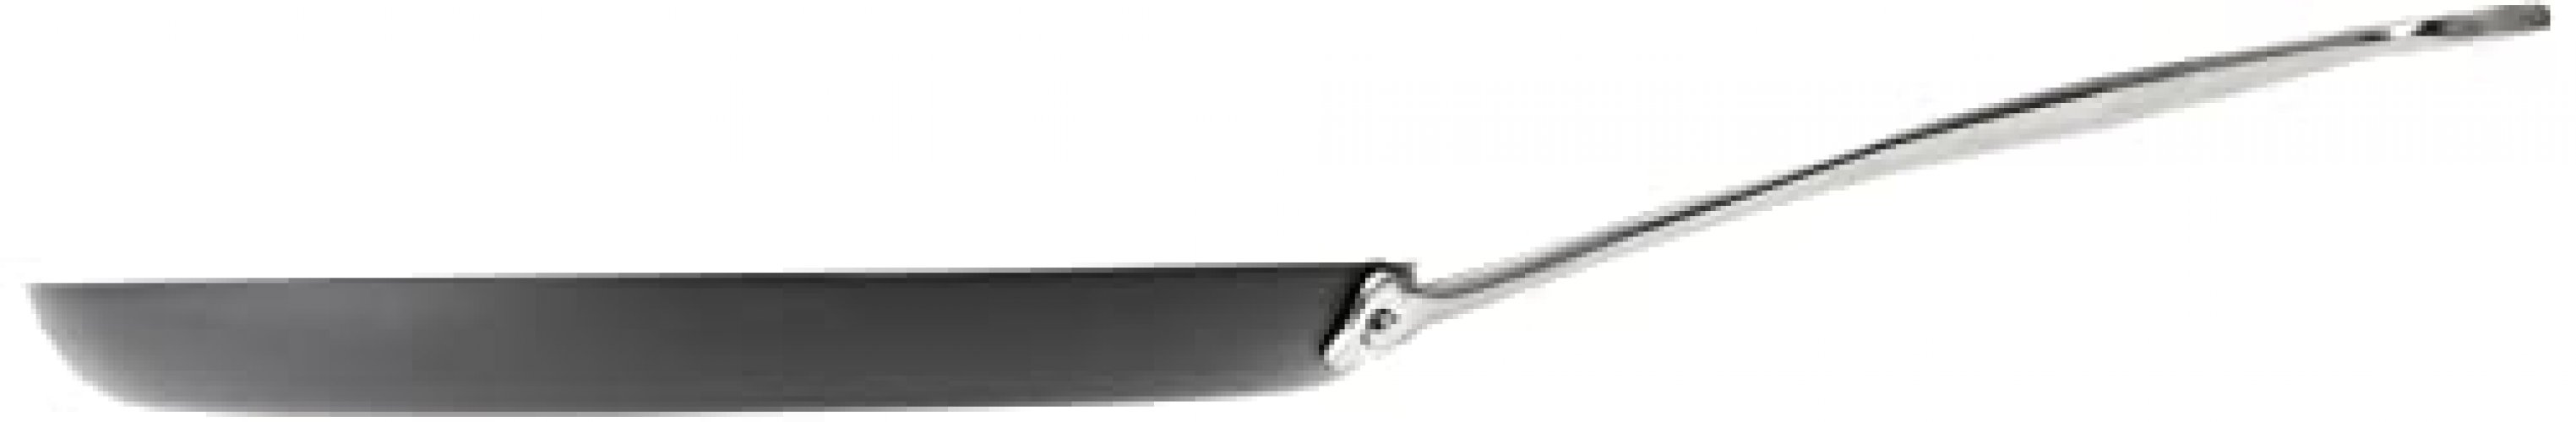 Cuisinart 623-24 Chef's Classic Nonstick Hard-Anodized 10-Inch Crepe Pan 